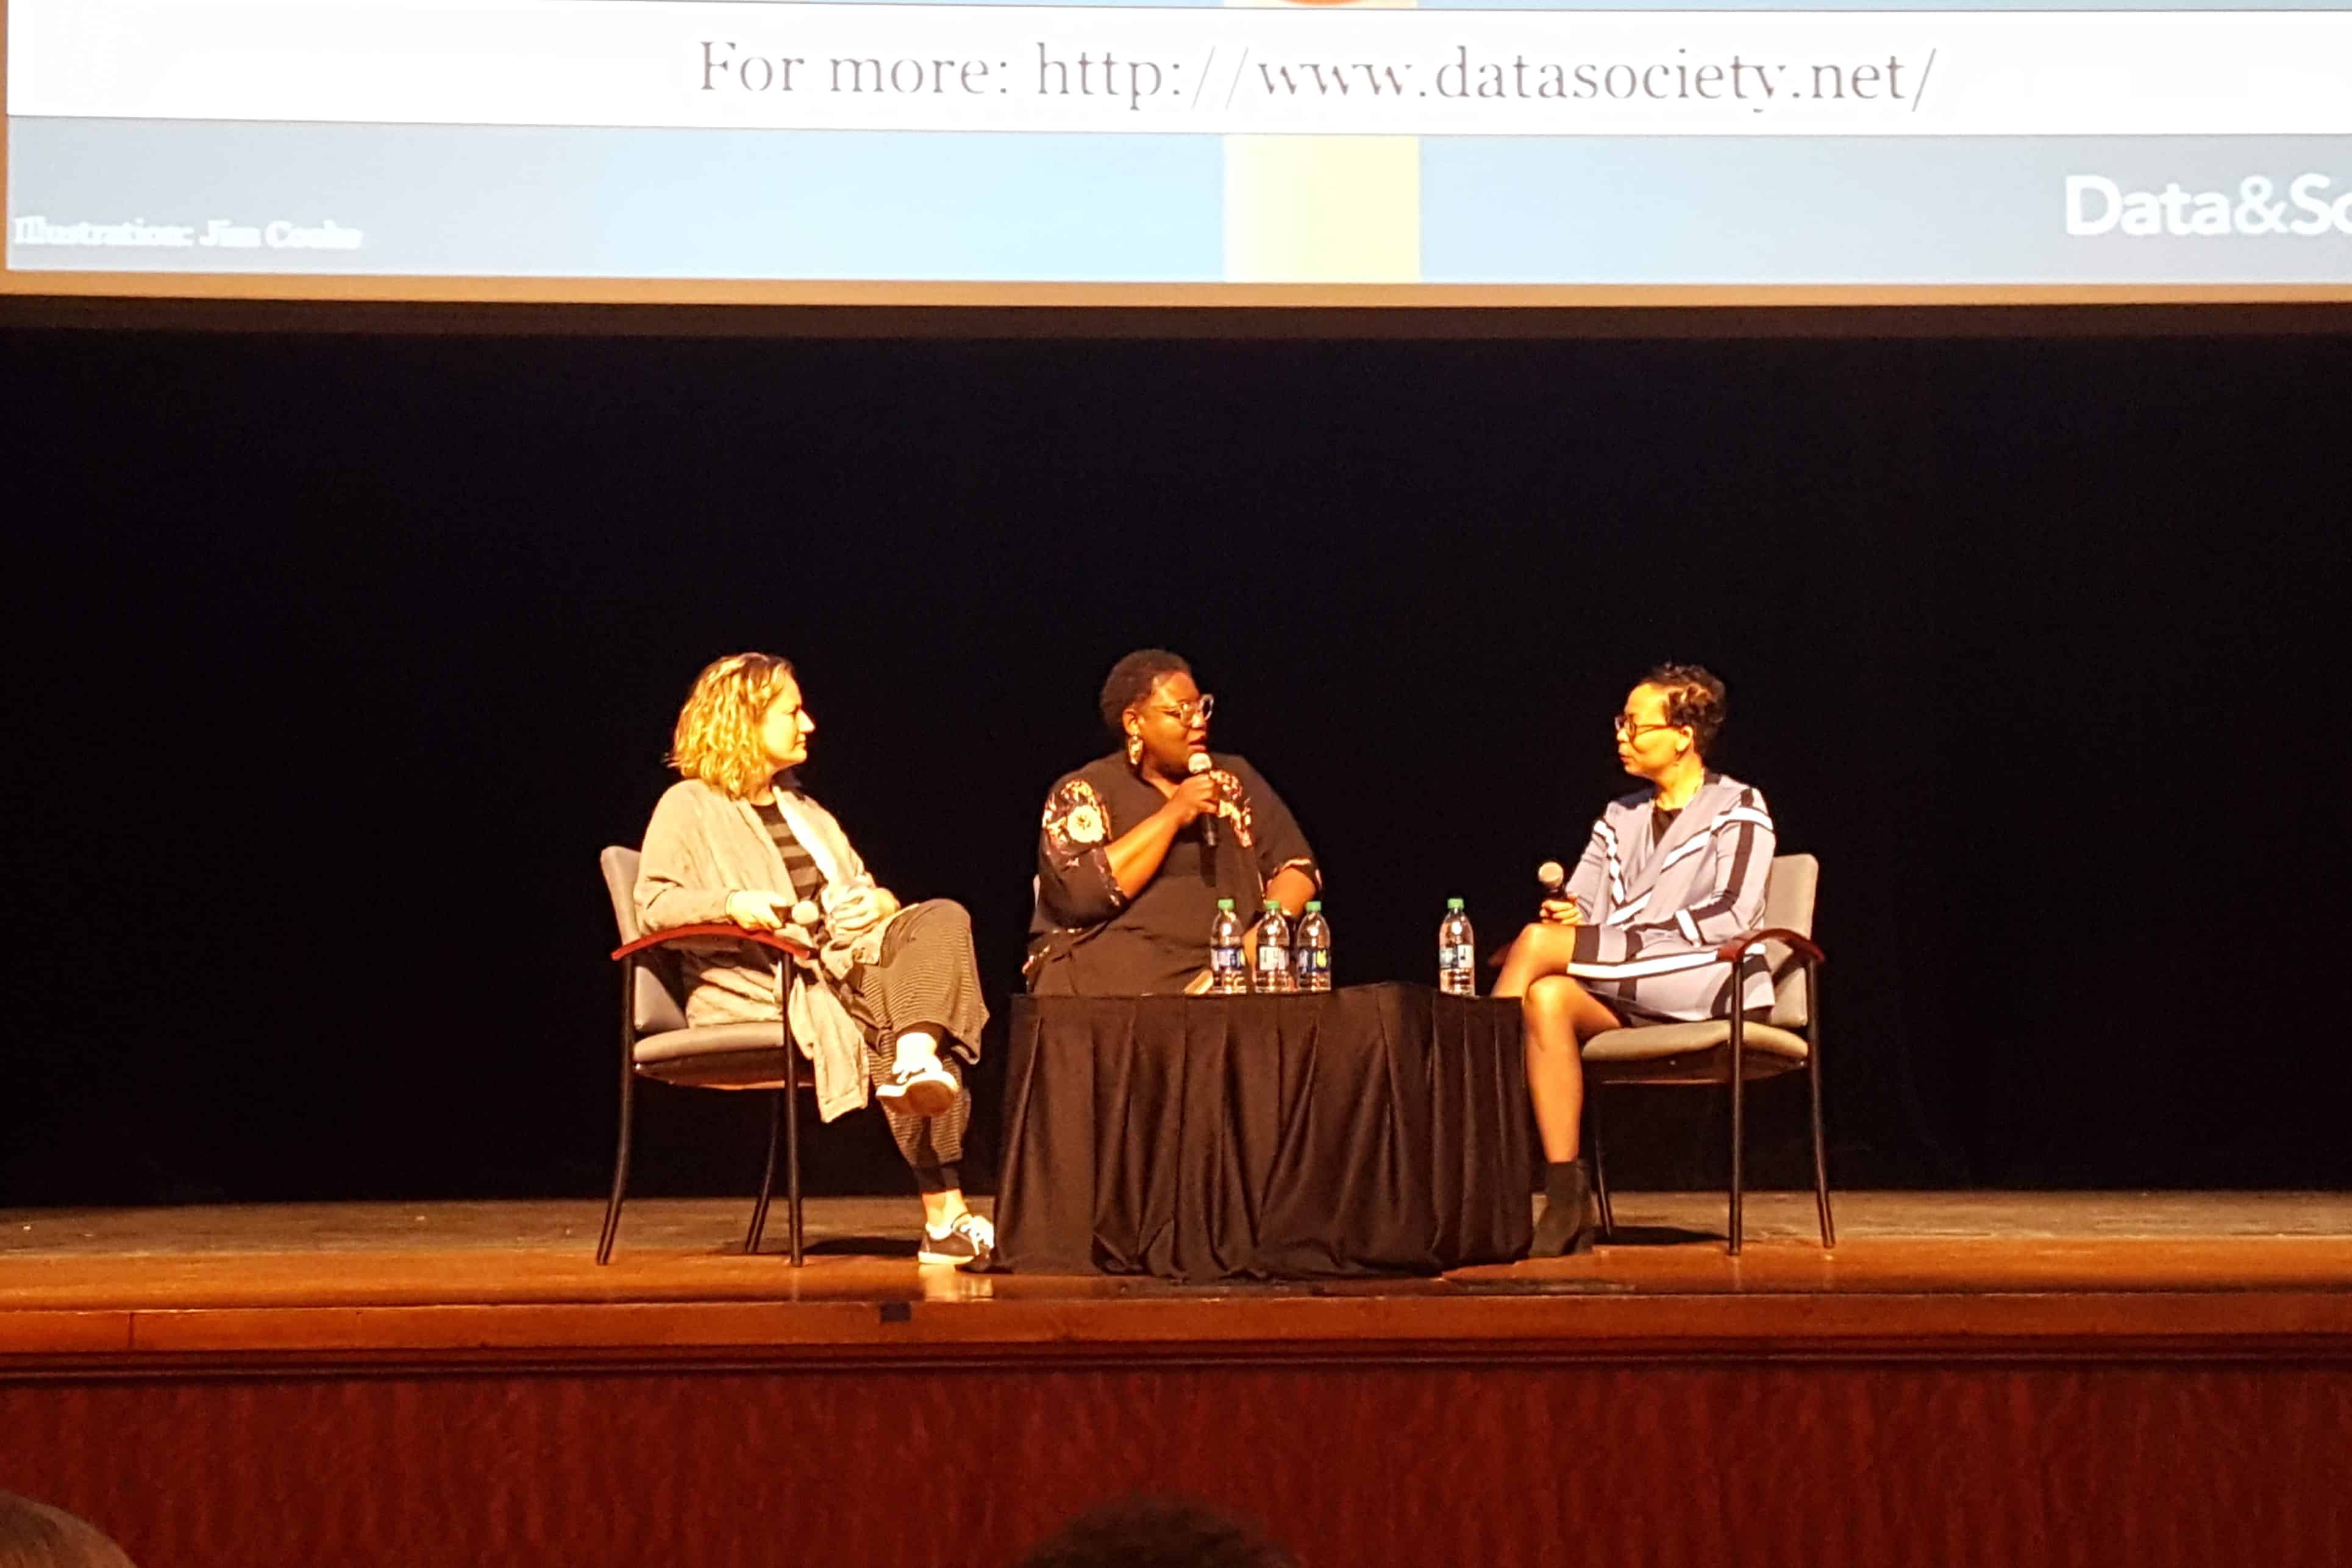 Tracie D. Hall (center), director of the culture program at the Joyce Foundation, moderates a discussion between danah boyd (left) and Elaine Westbrooks. Photo: Carrie Smith/American Libraries